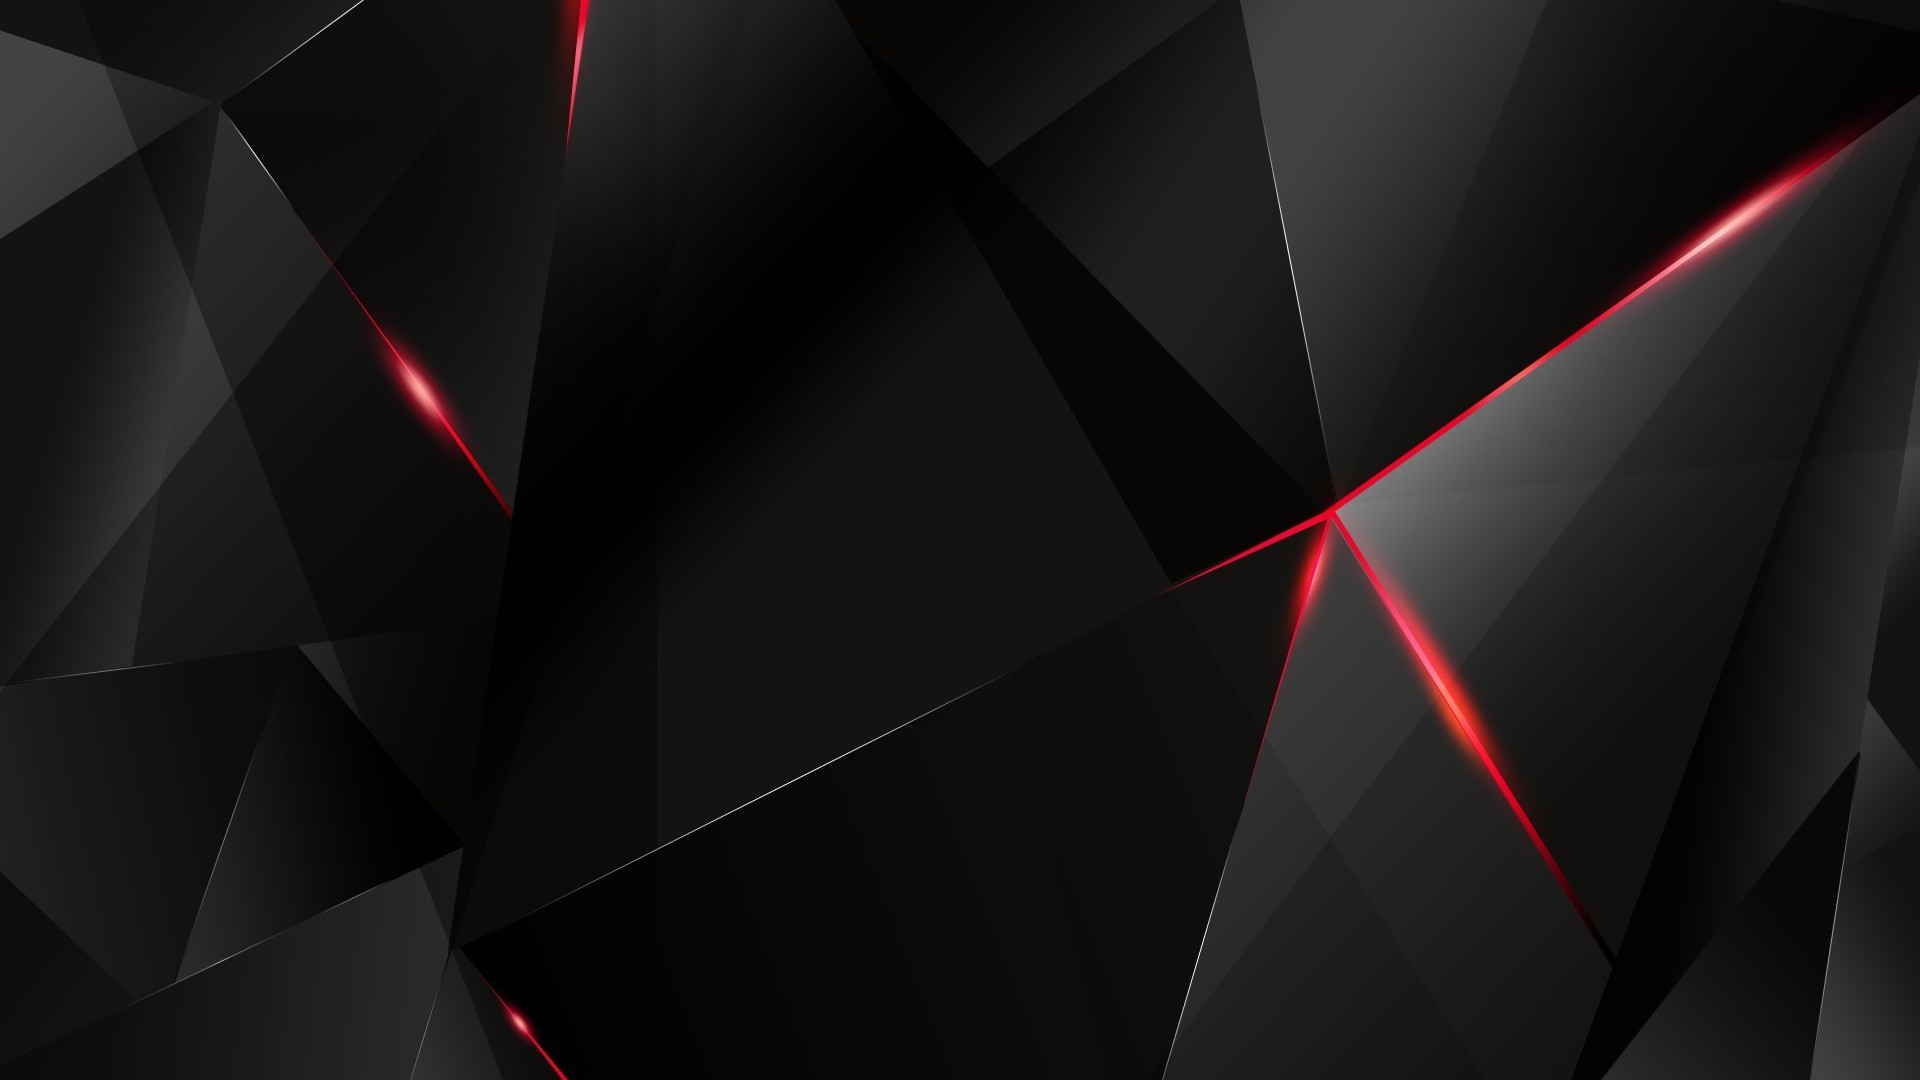 Black polygon with red edges abstract hd wallpaper 1920x1080 120 1920x1080